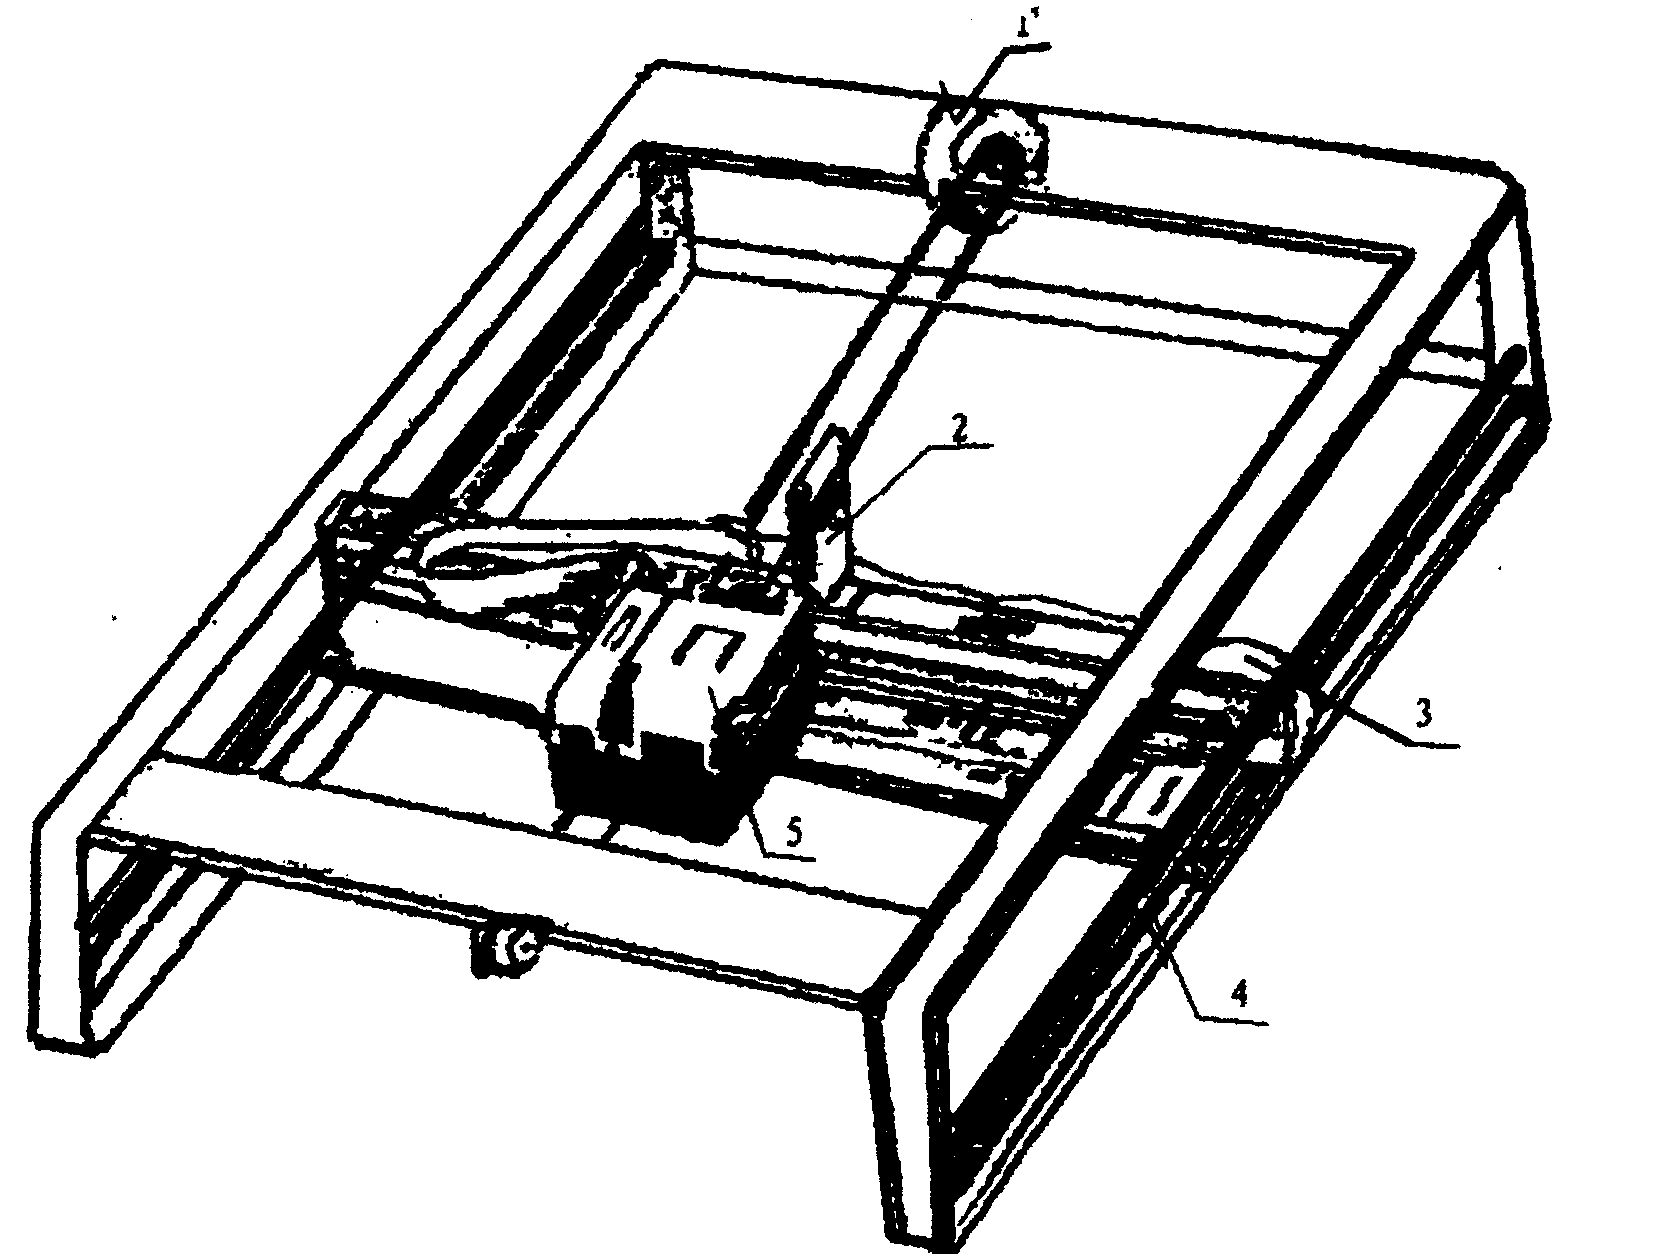 Covered type ink-jet printer